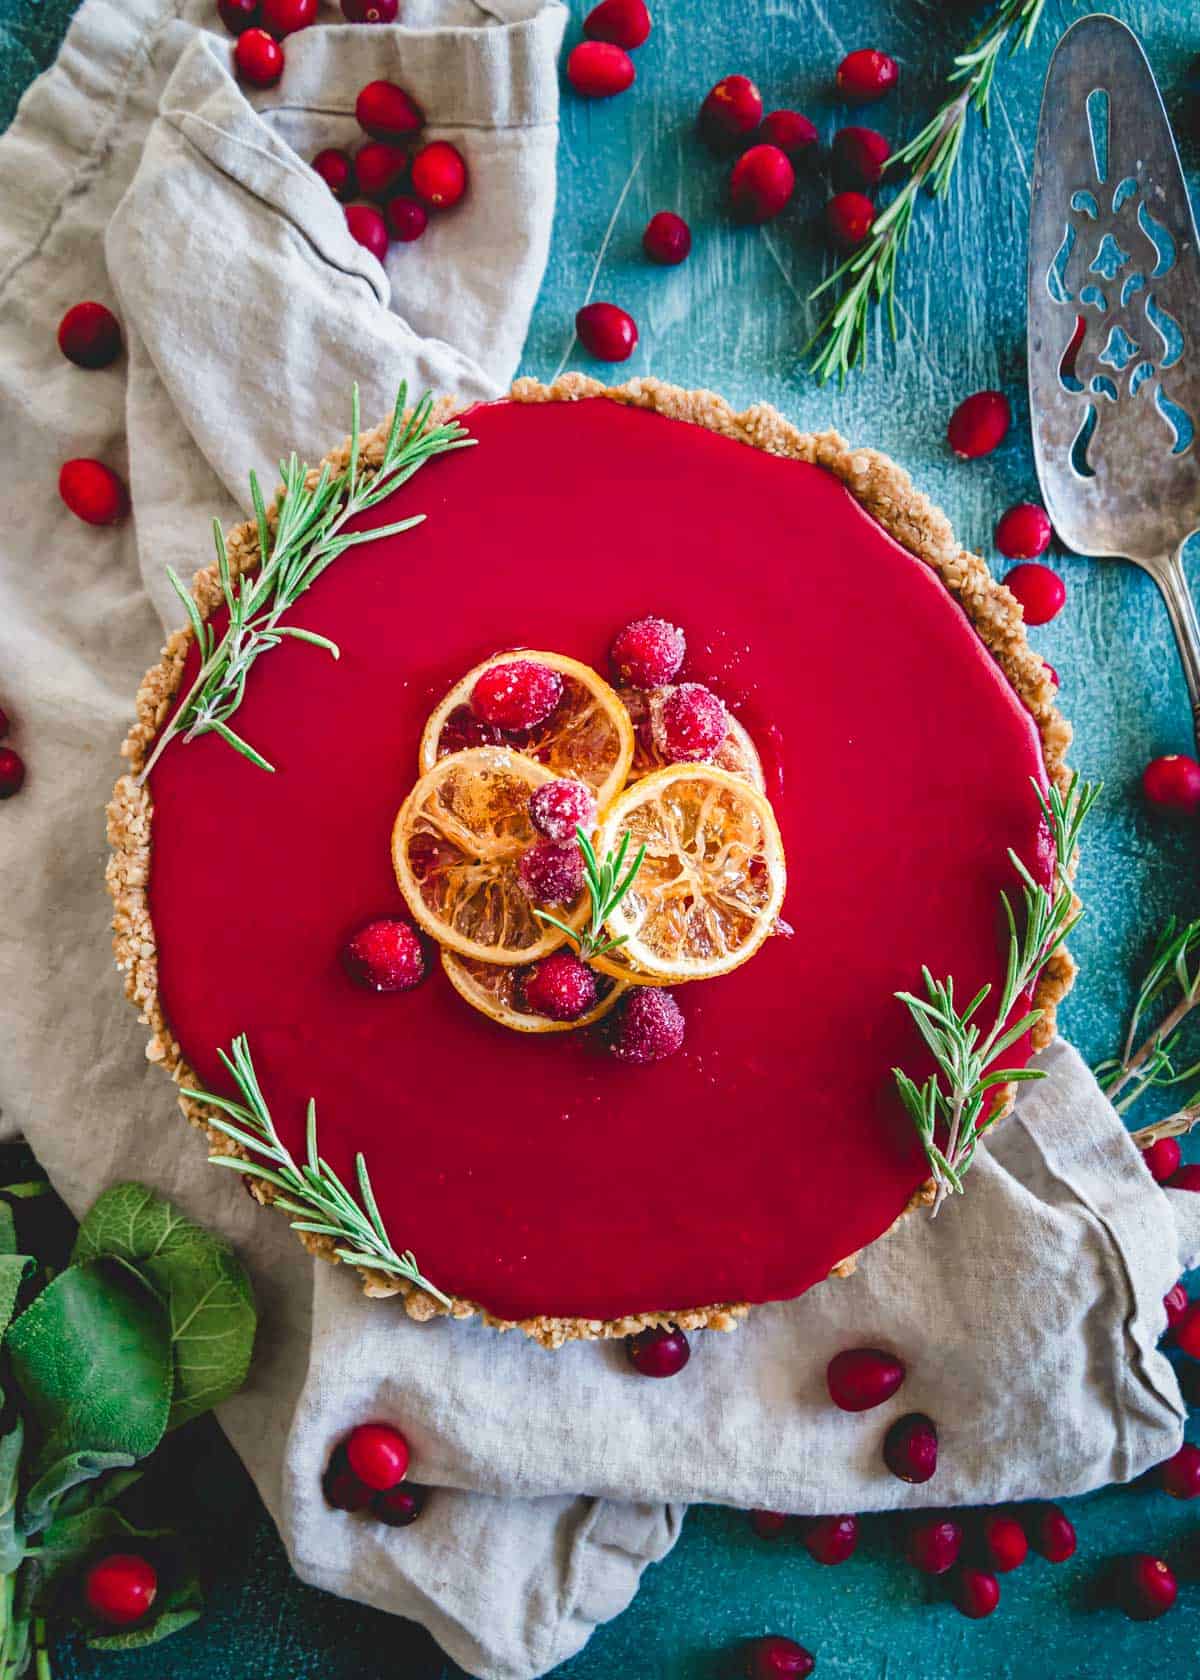 This cranberry curd tart features a smooth sweet and tart cranberry curd filling inside a gluten-free oat and nut-based crust that results in a stunningly delicious and festive holiday dessert.